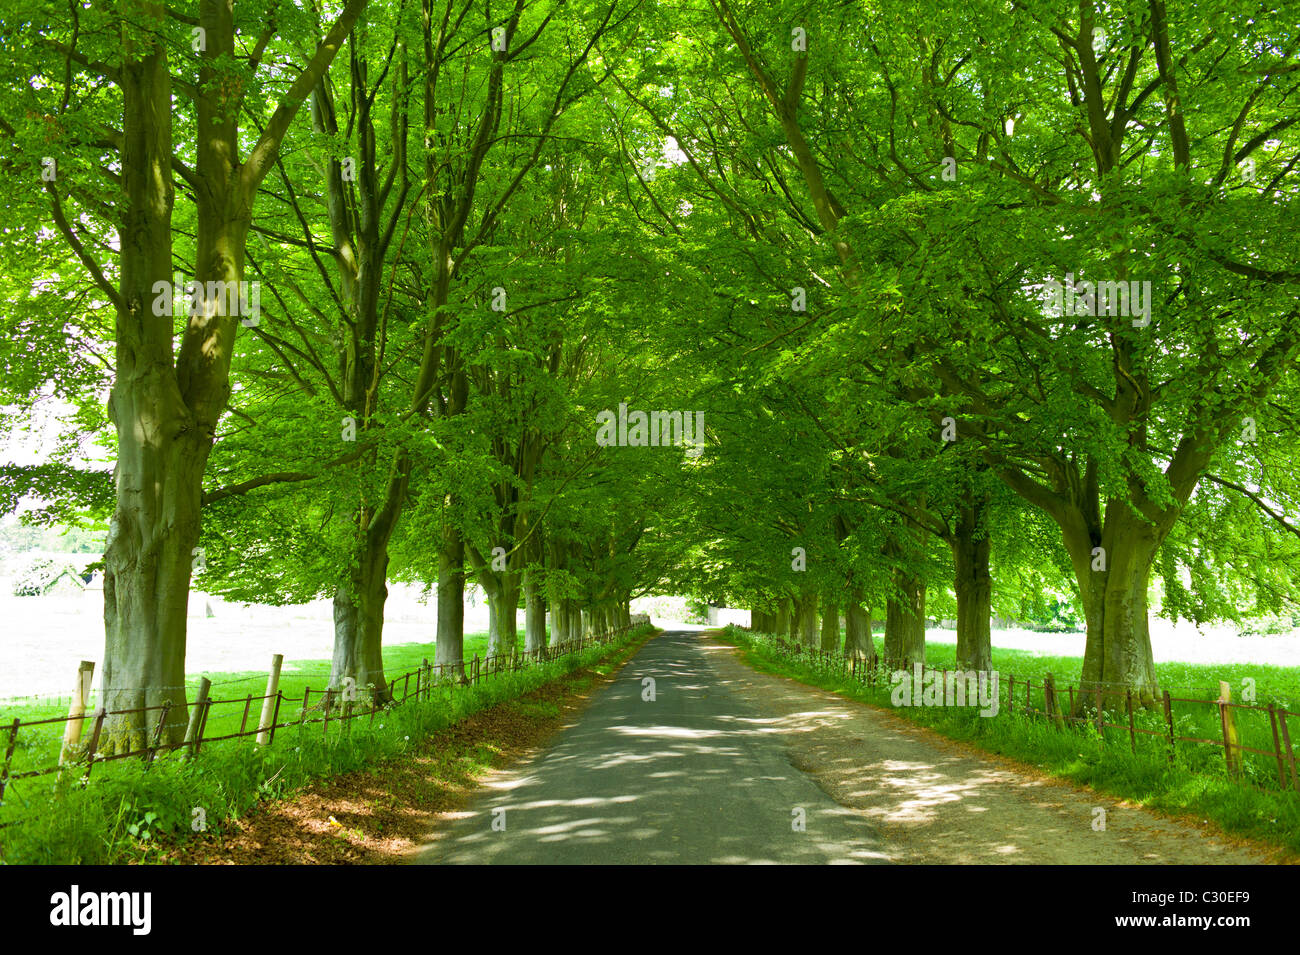 Avenue of beech trees, Asthall, the Cotswolds, Oxfordshire, UK Stock Photo